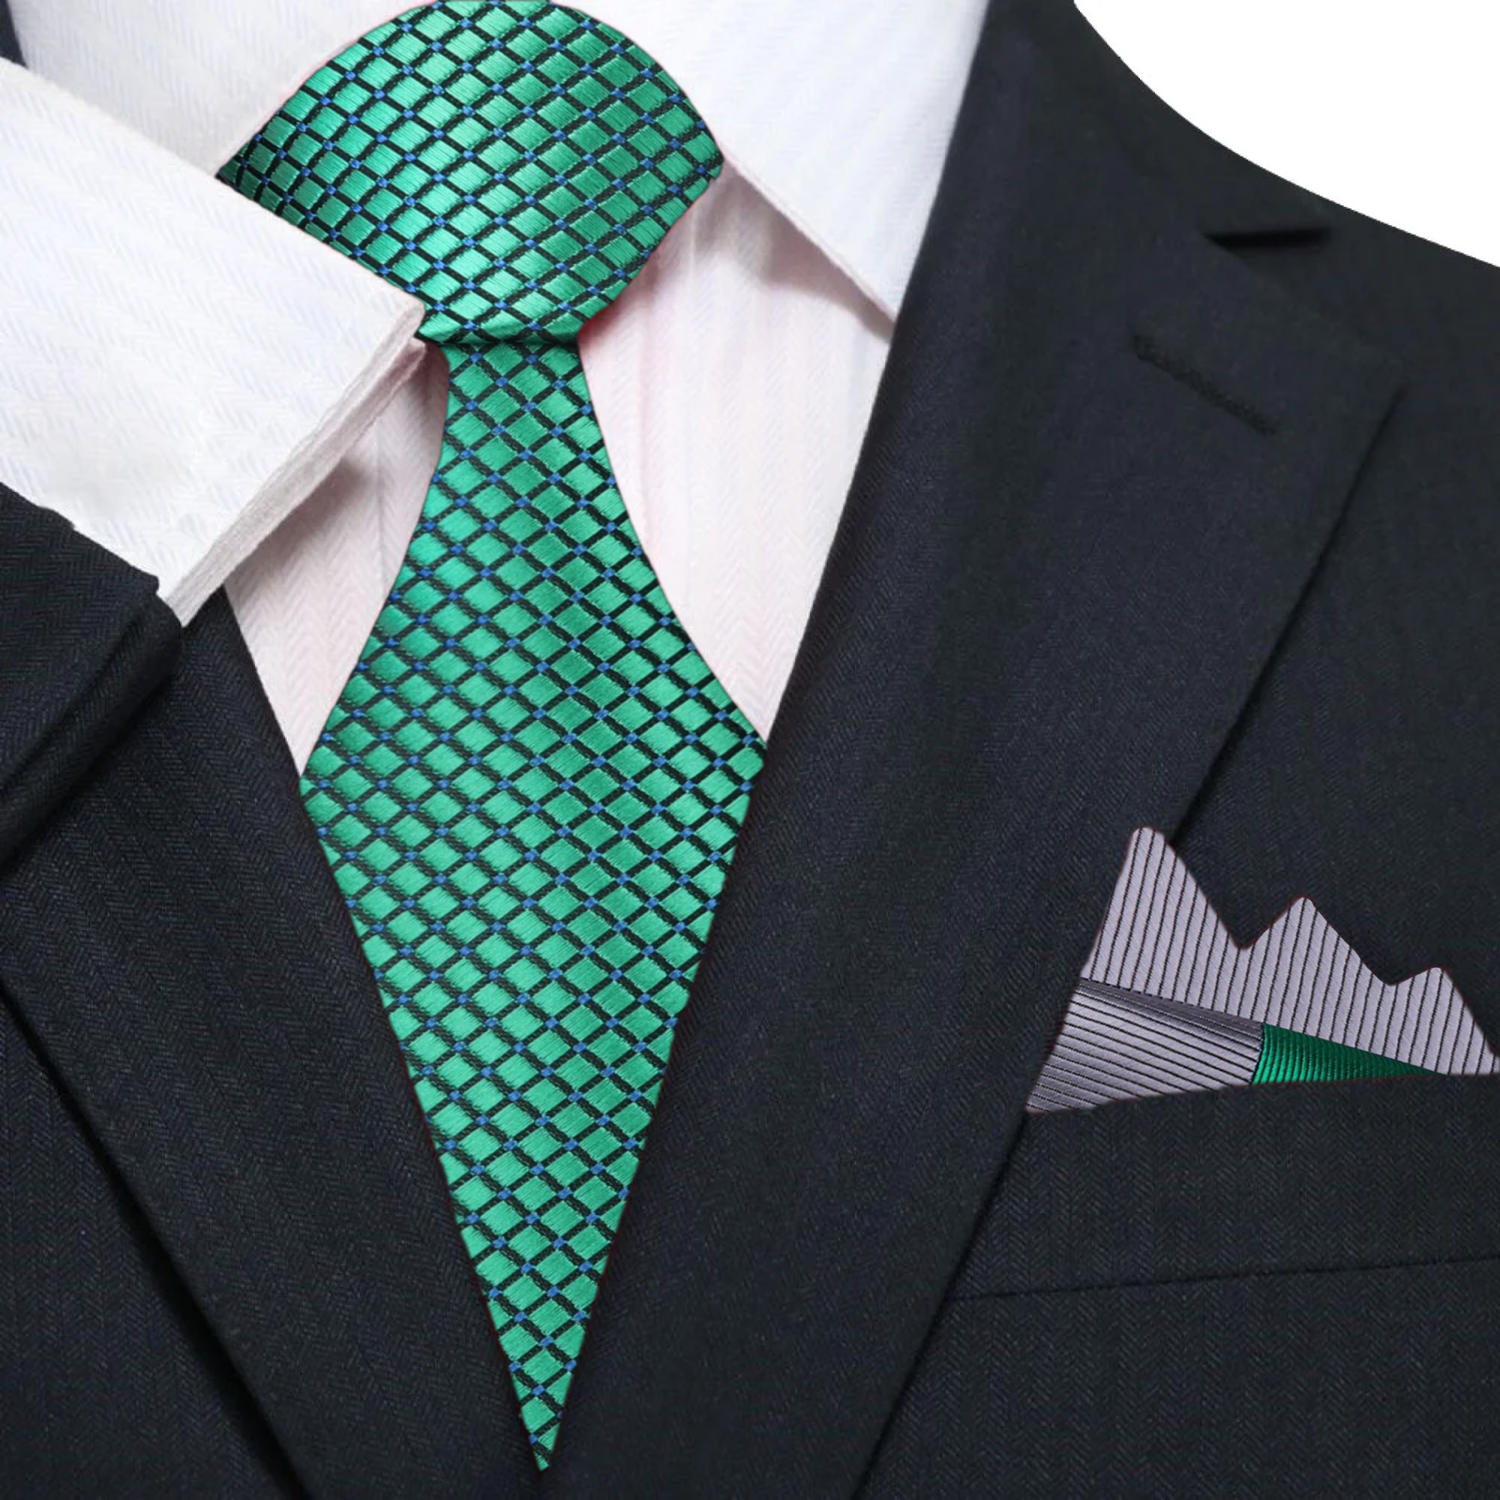 Main: Green Geometric Tie with Grey and Green Abstract Square